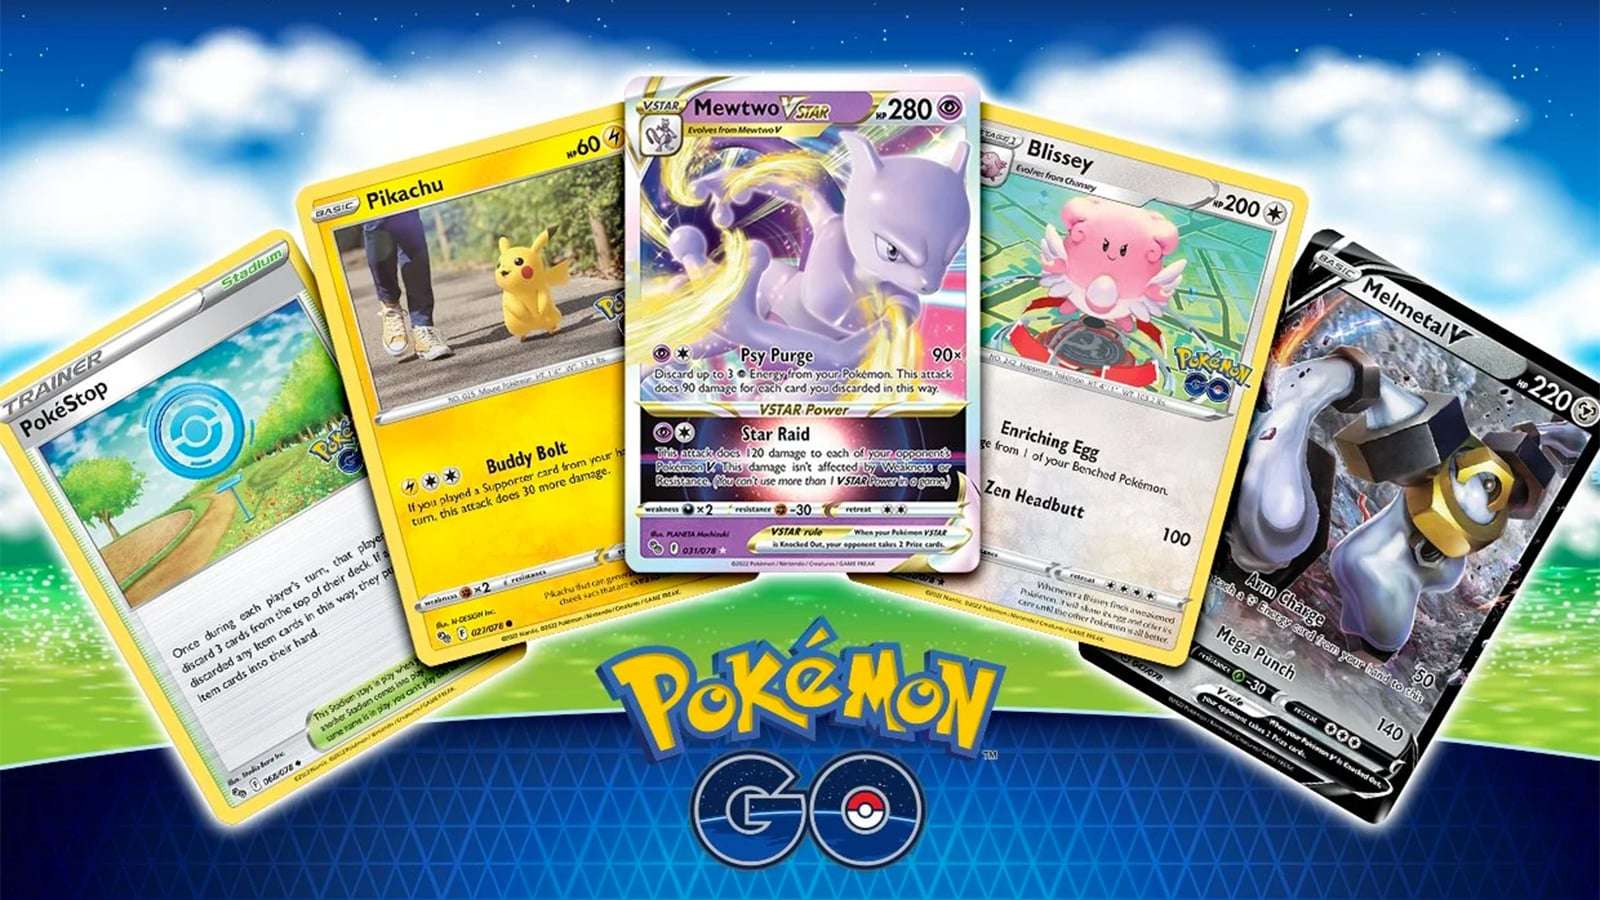 Some of the best and rarest cards in the Pokemon Go TCG set